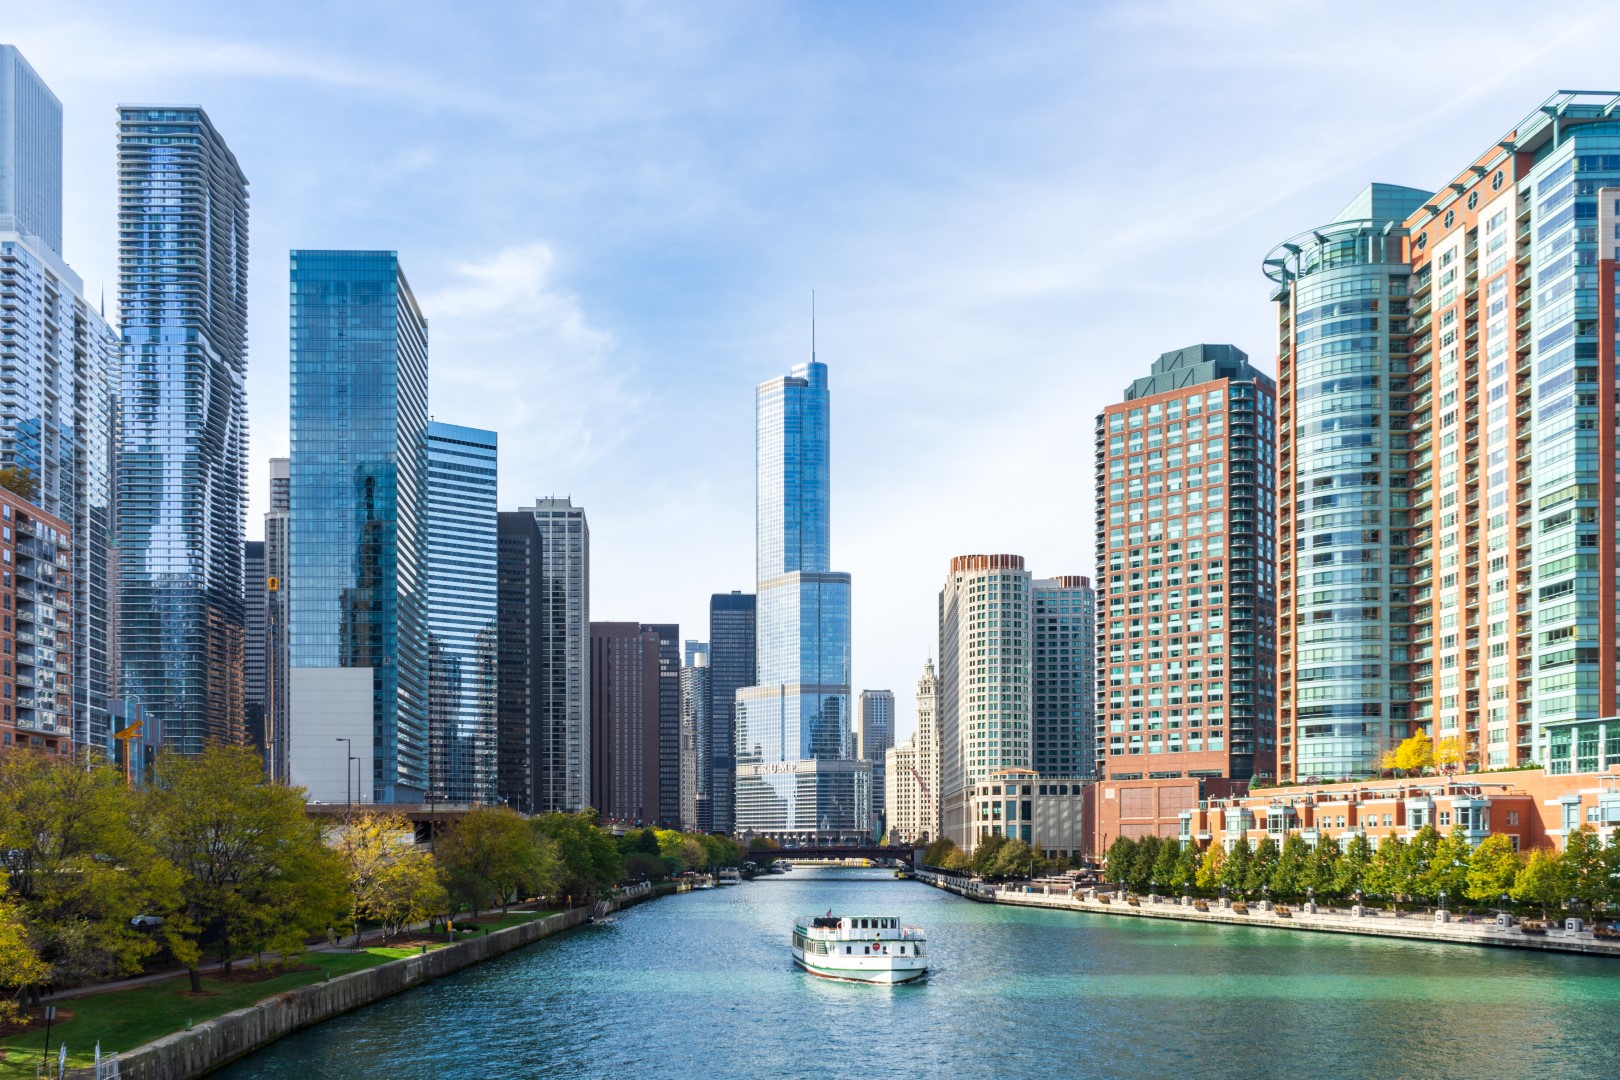 River cruise in Chicago, United States.